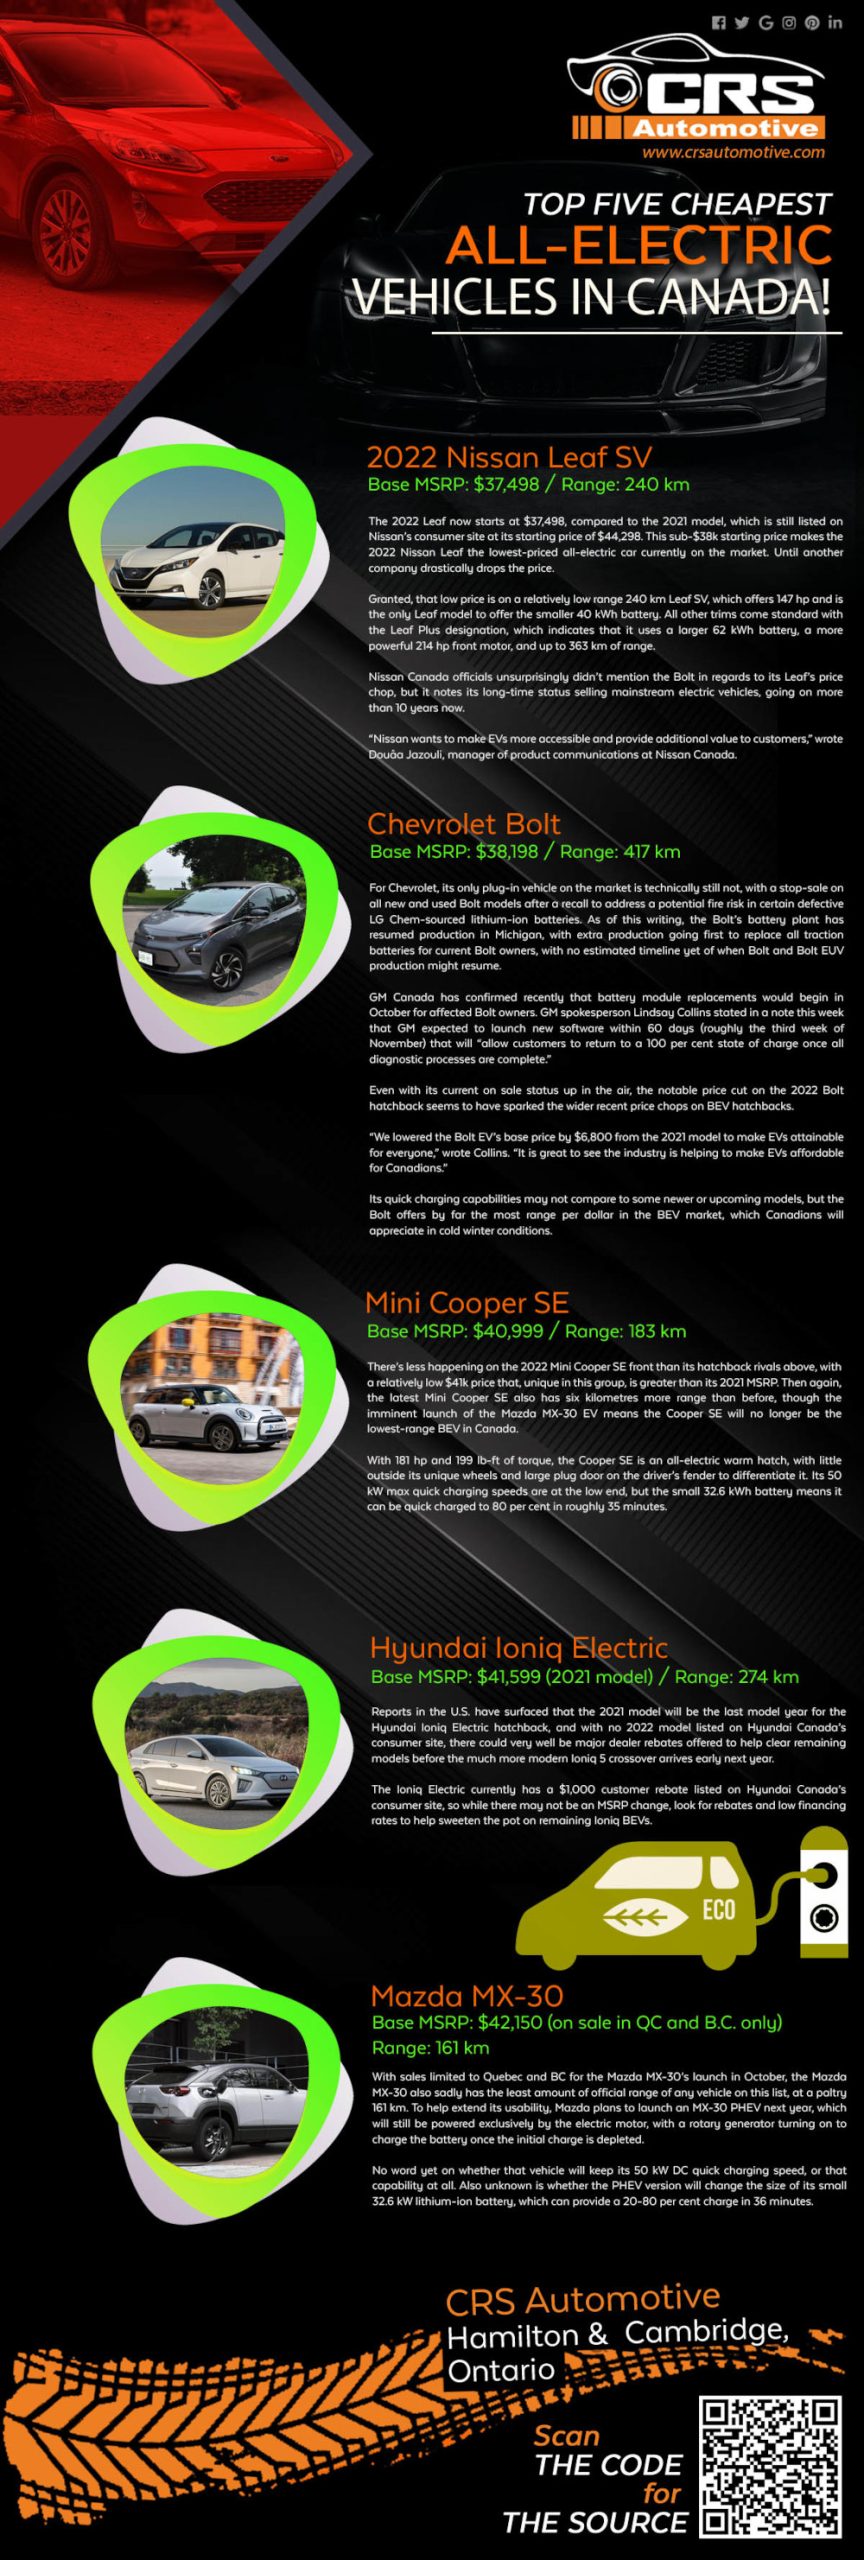 Top 5 cheapest all-electric cars in Canada Infographic